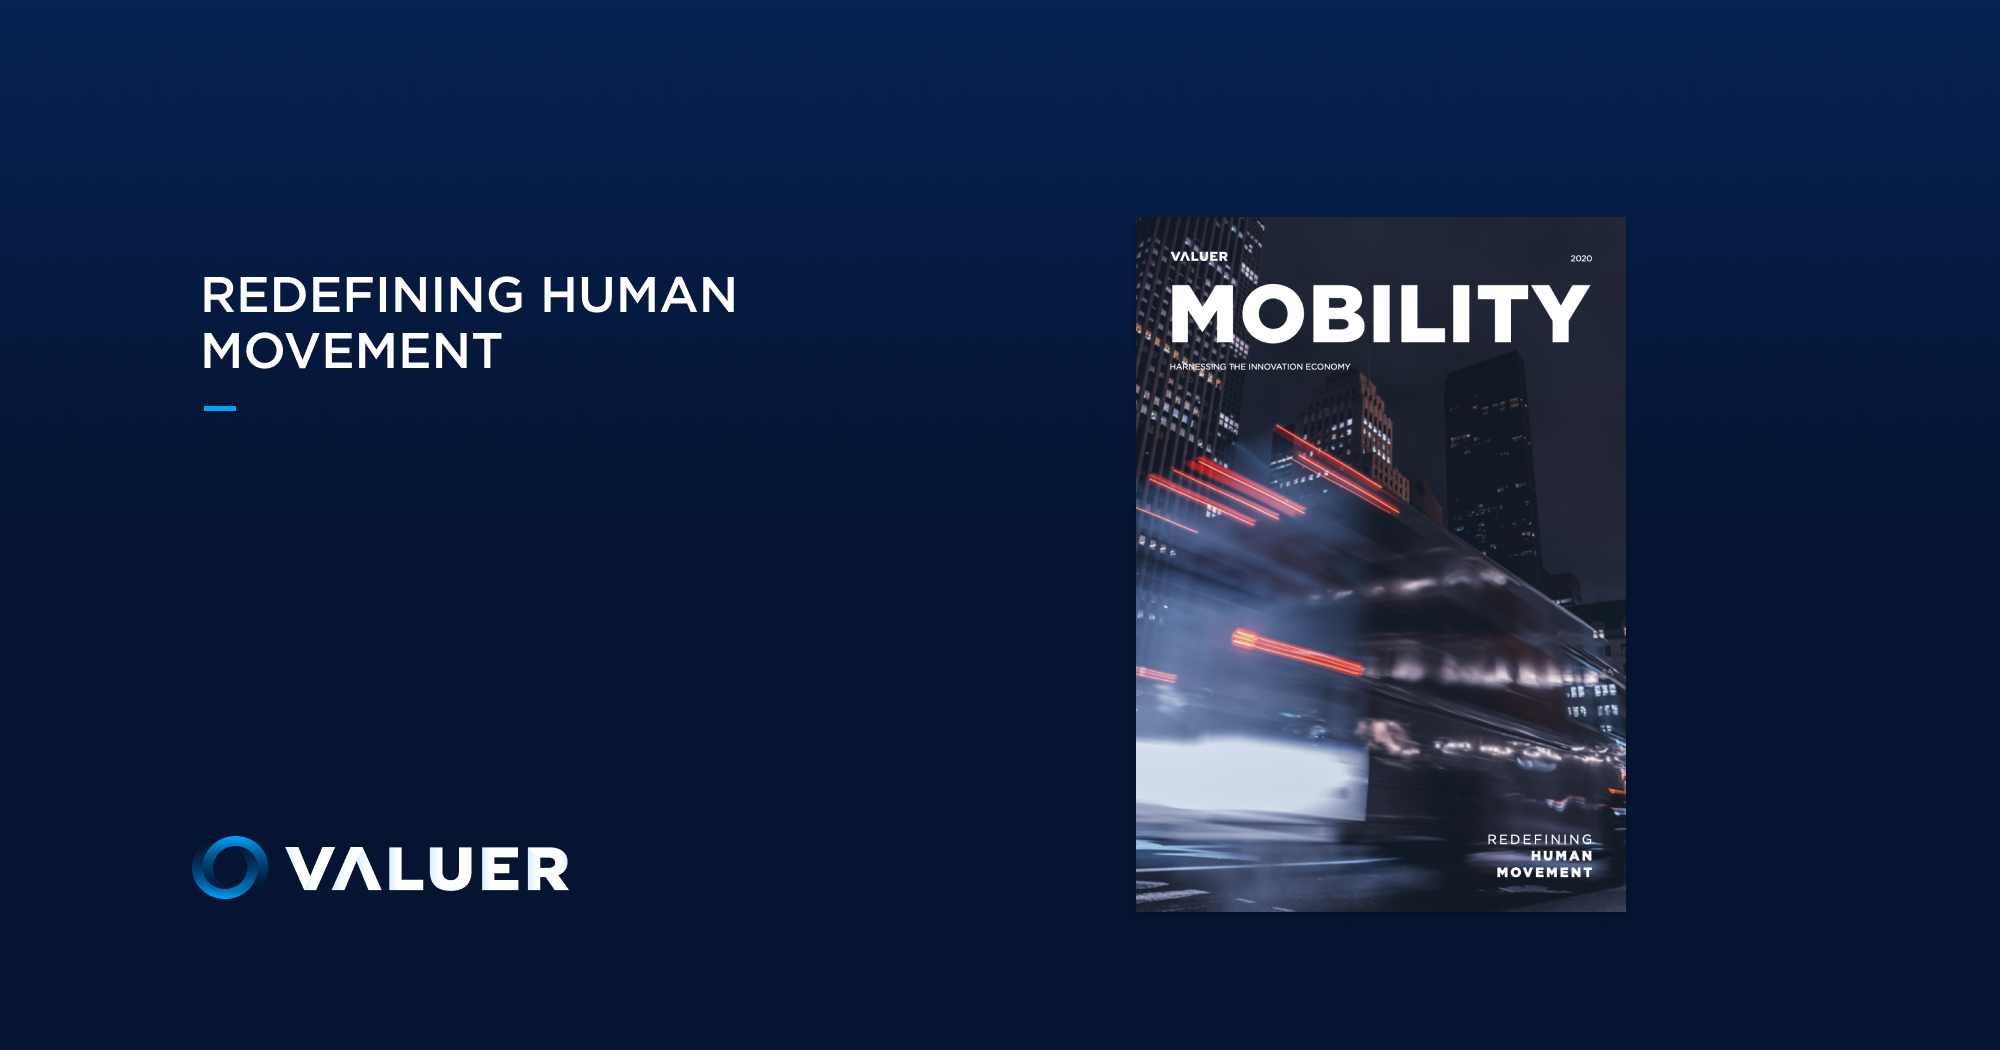 redefining-human-movement-mobility-feature-image